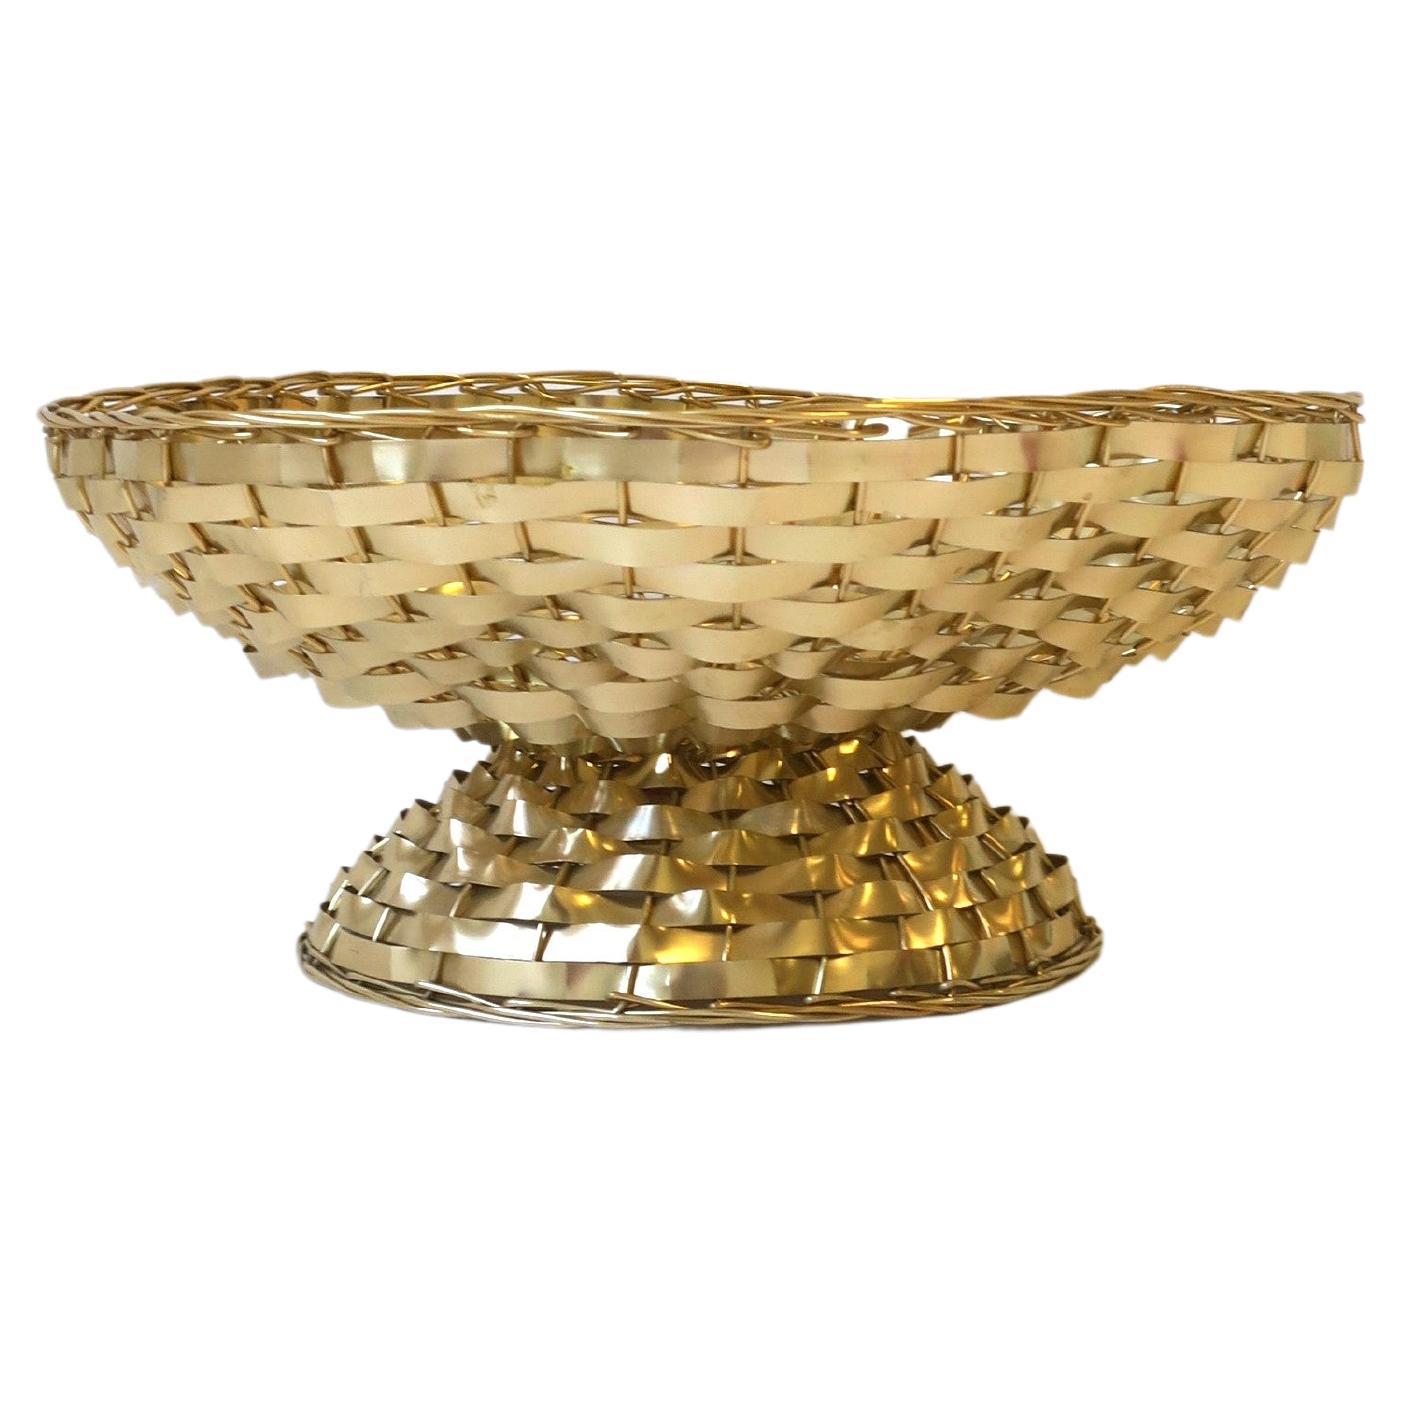 Italian Gold Wire Wicker Compote Basket with Scalloped Edge For Sale